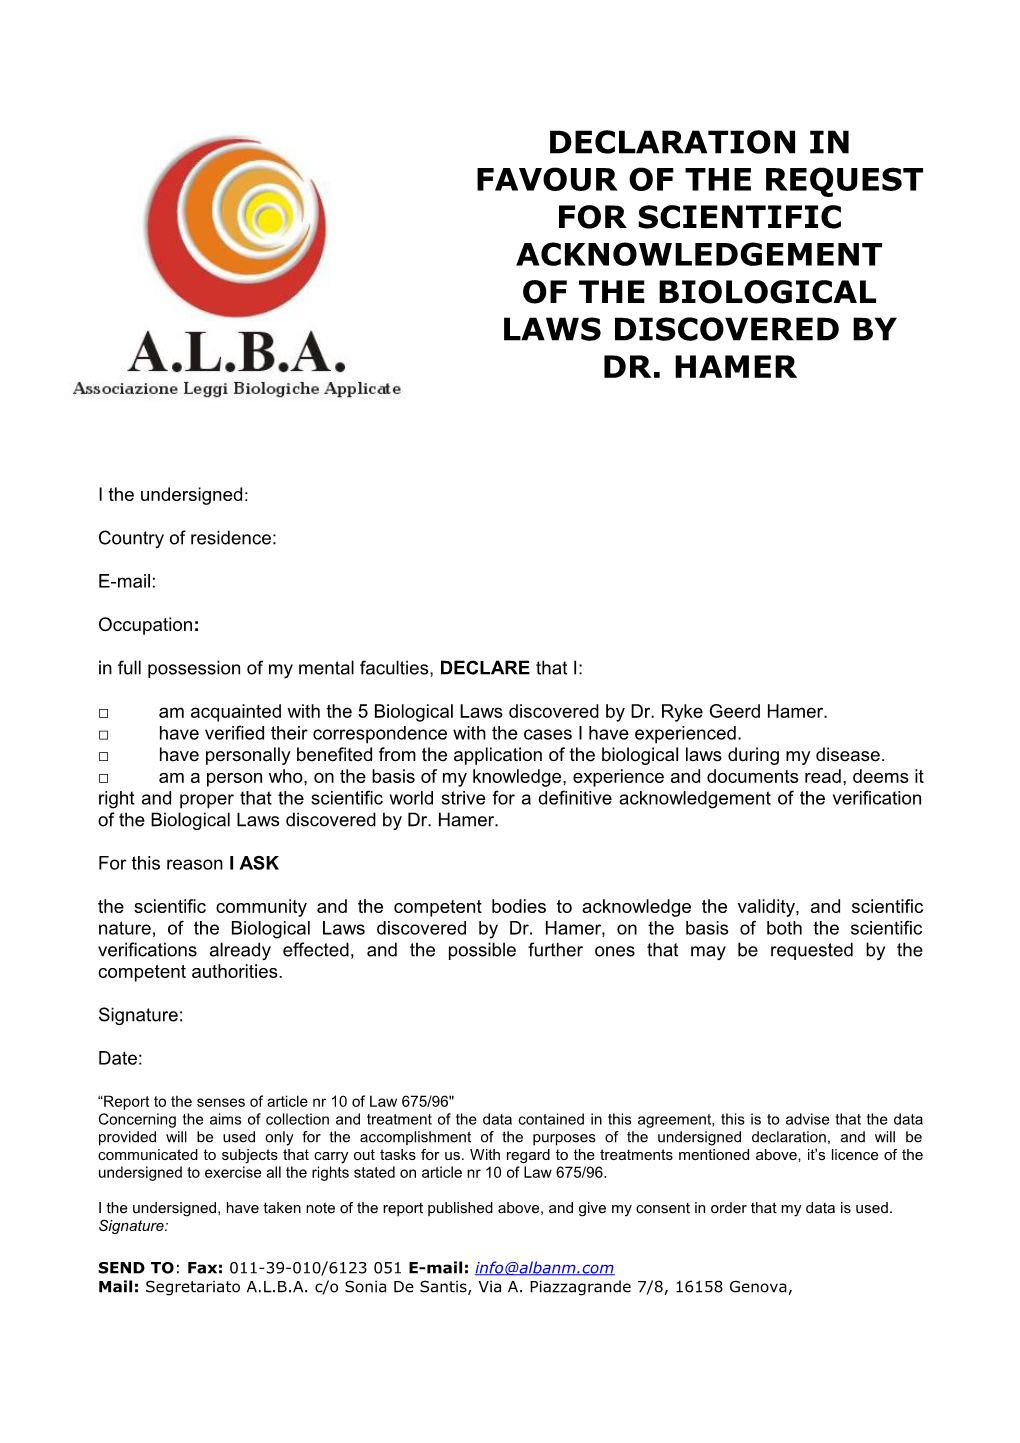 Declaration in Favour of the Request for Scientific Acknowledgement of the Biological Laws